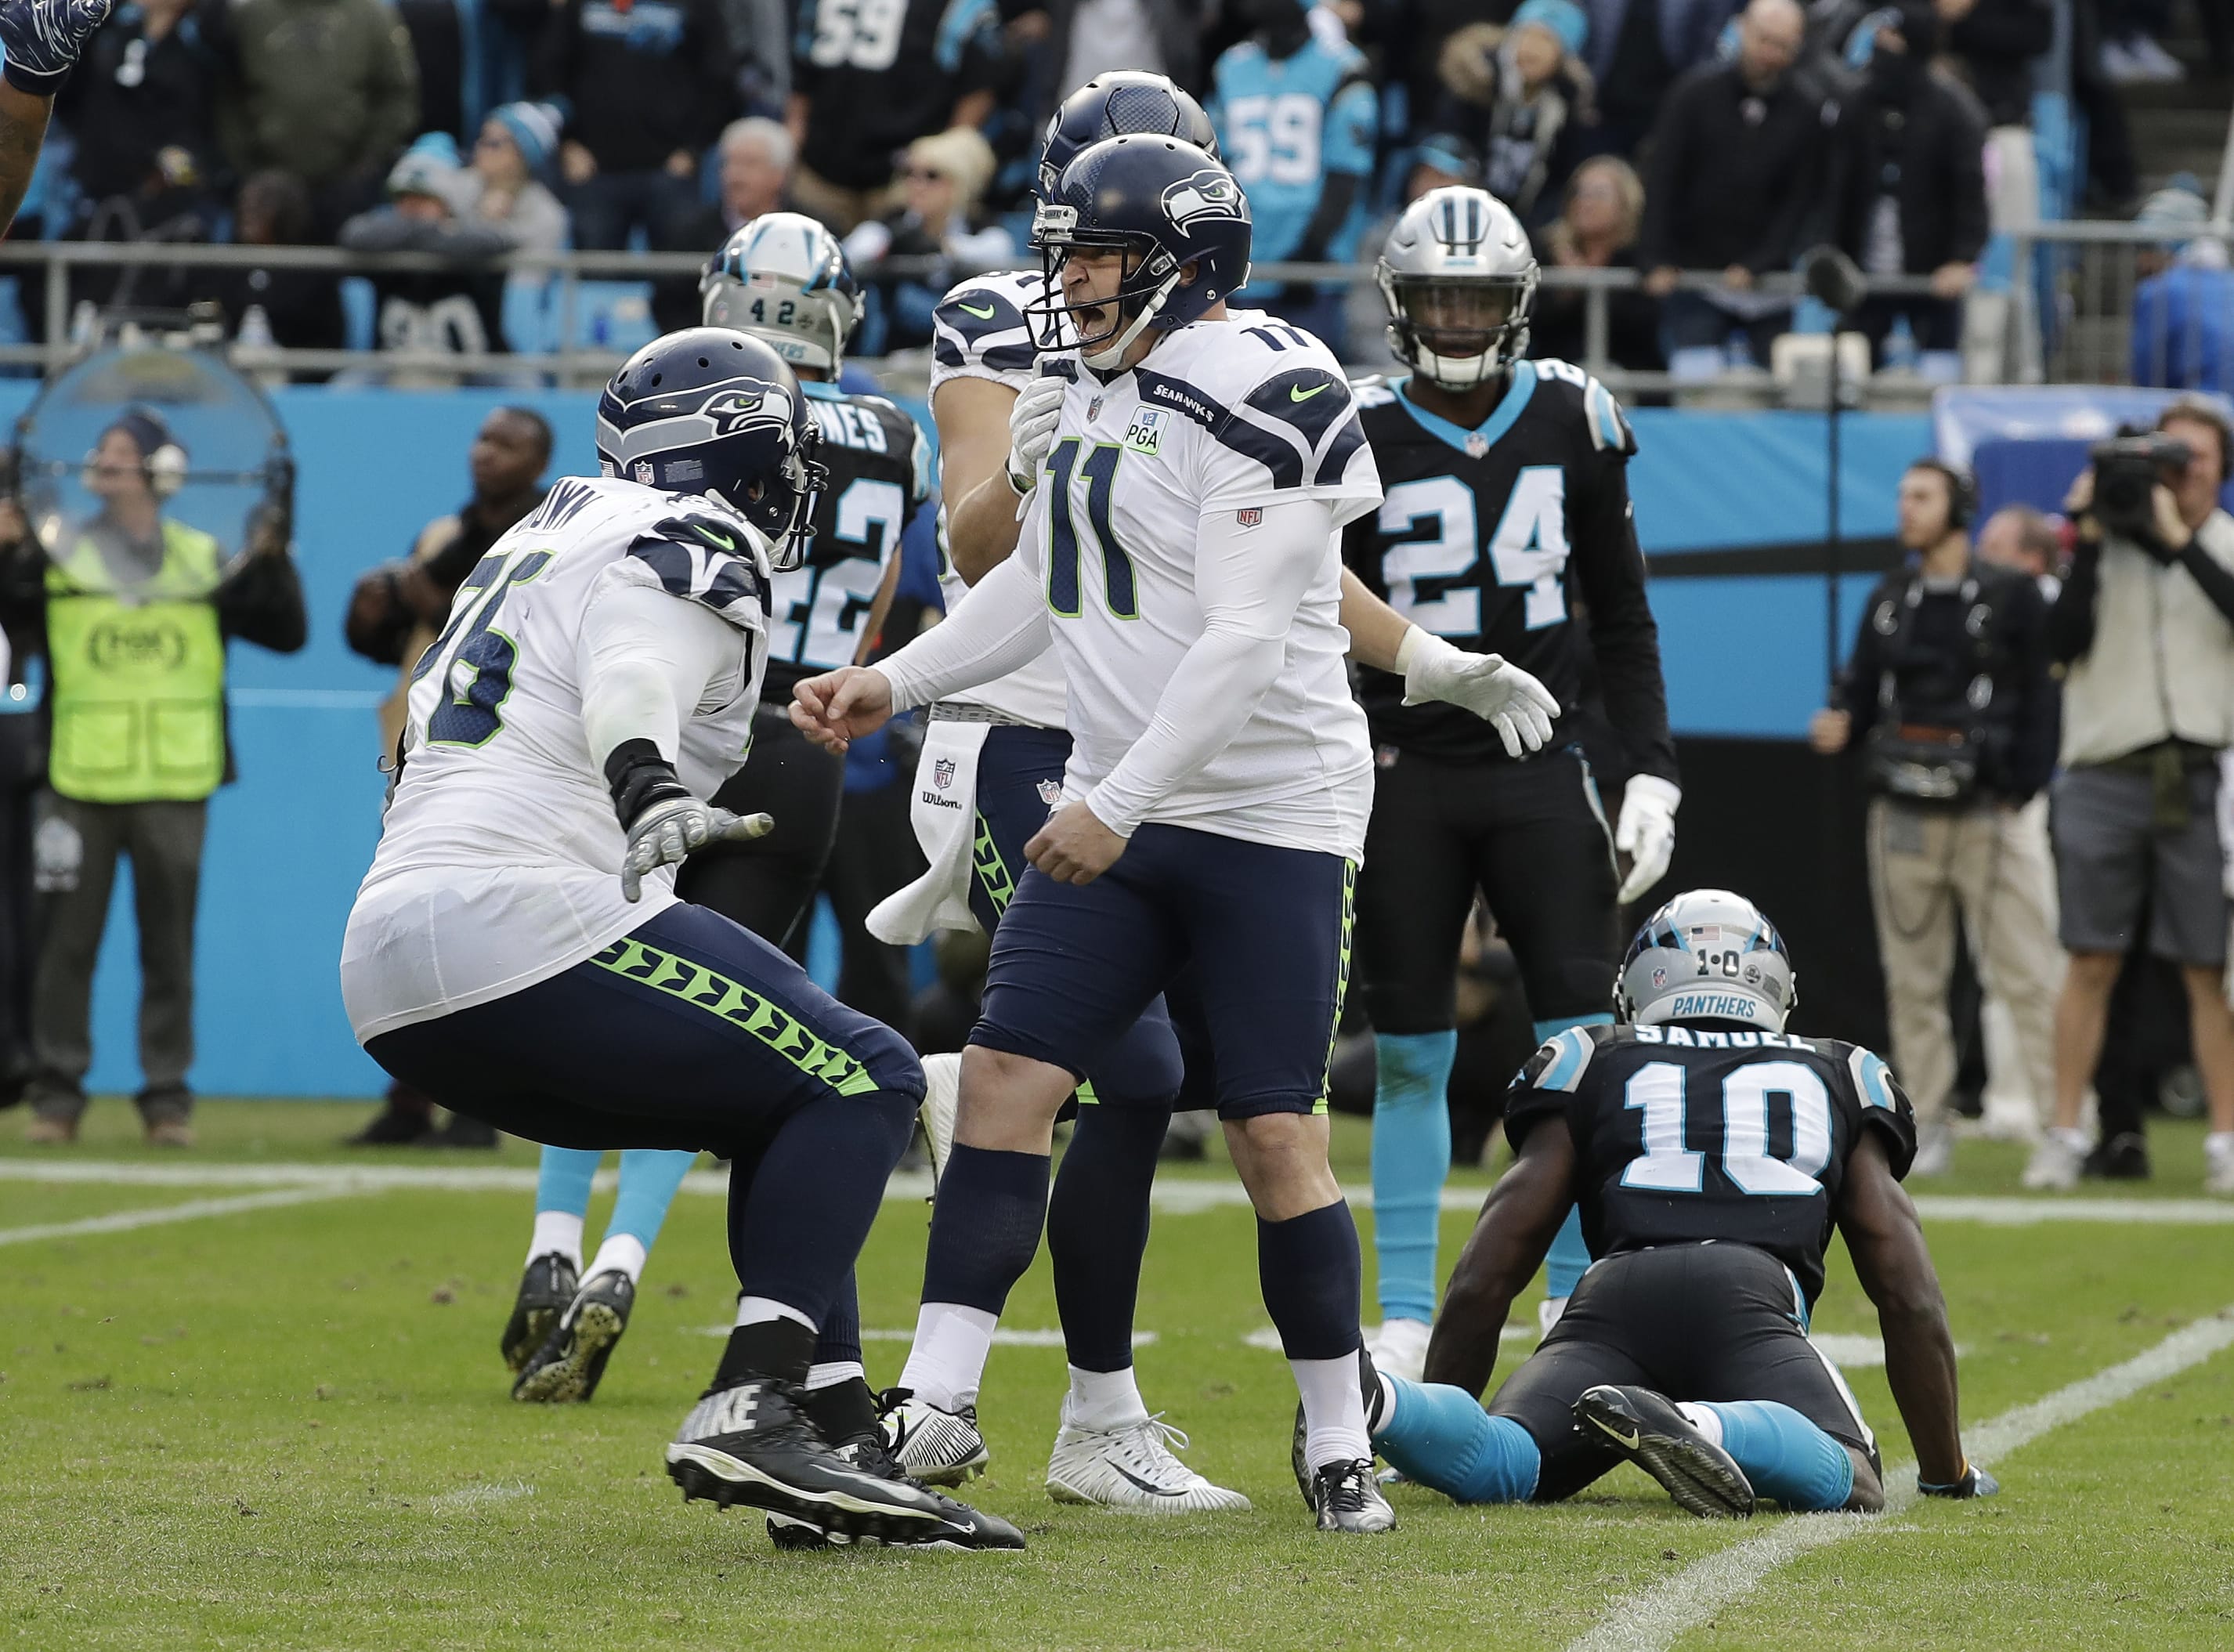 Seattle Seahawks' Sebastian Janikowski (11) celebrates after his game-winning field goal against the Carolina Panthers during the second half of an NFL football game in Charlotte, N.C., Sunday, Nov. 25, 2018.